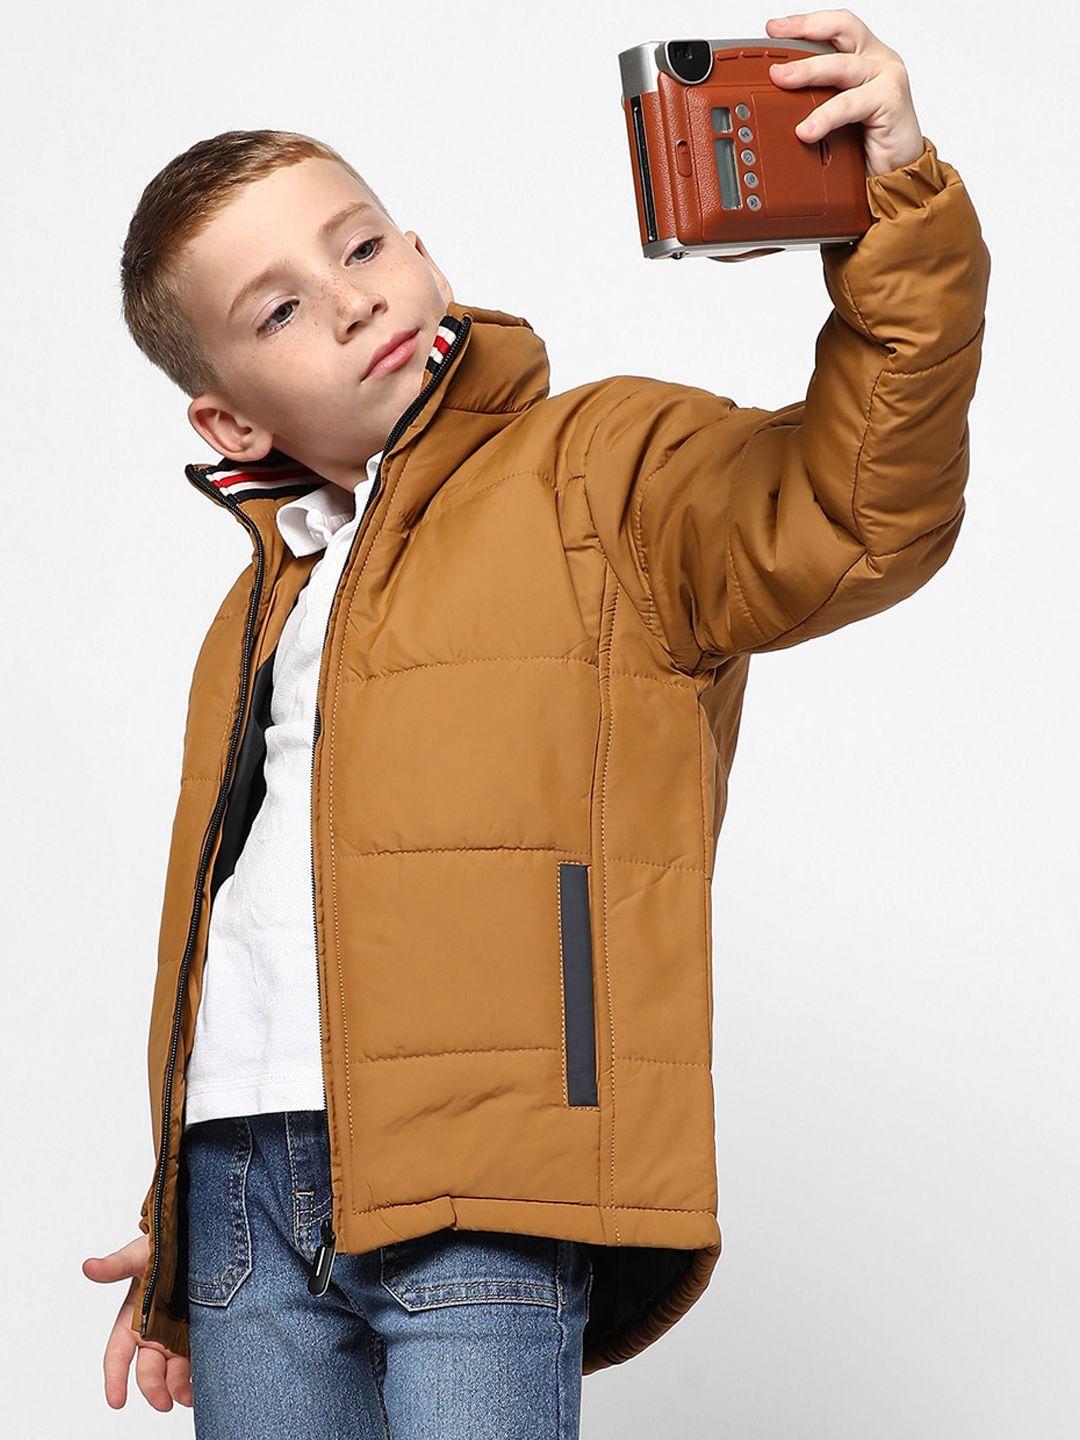 instafab-boys-brown-striped-windcheater-crop-outdoor-padded-jacket